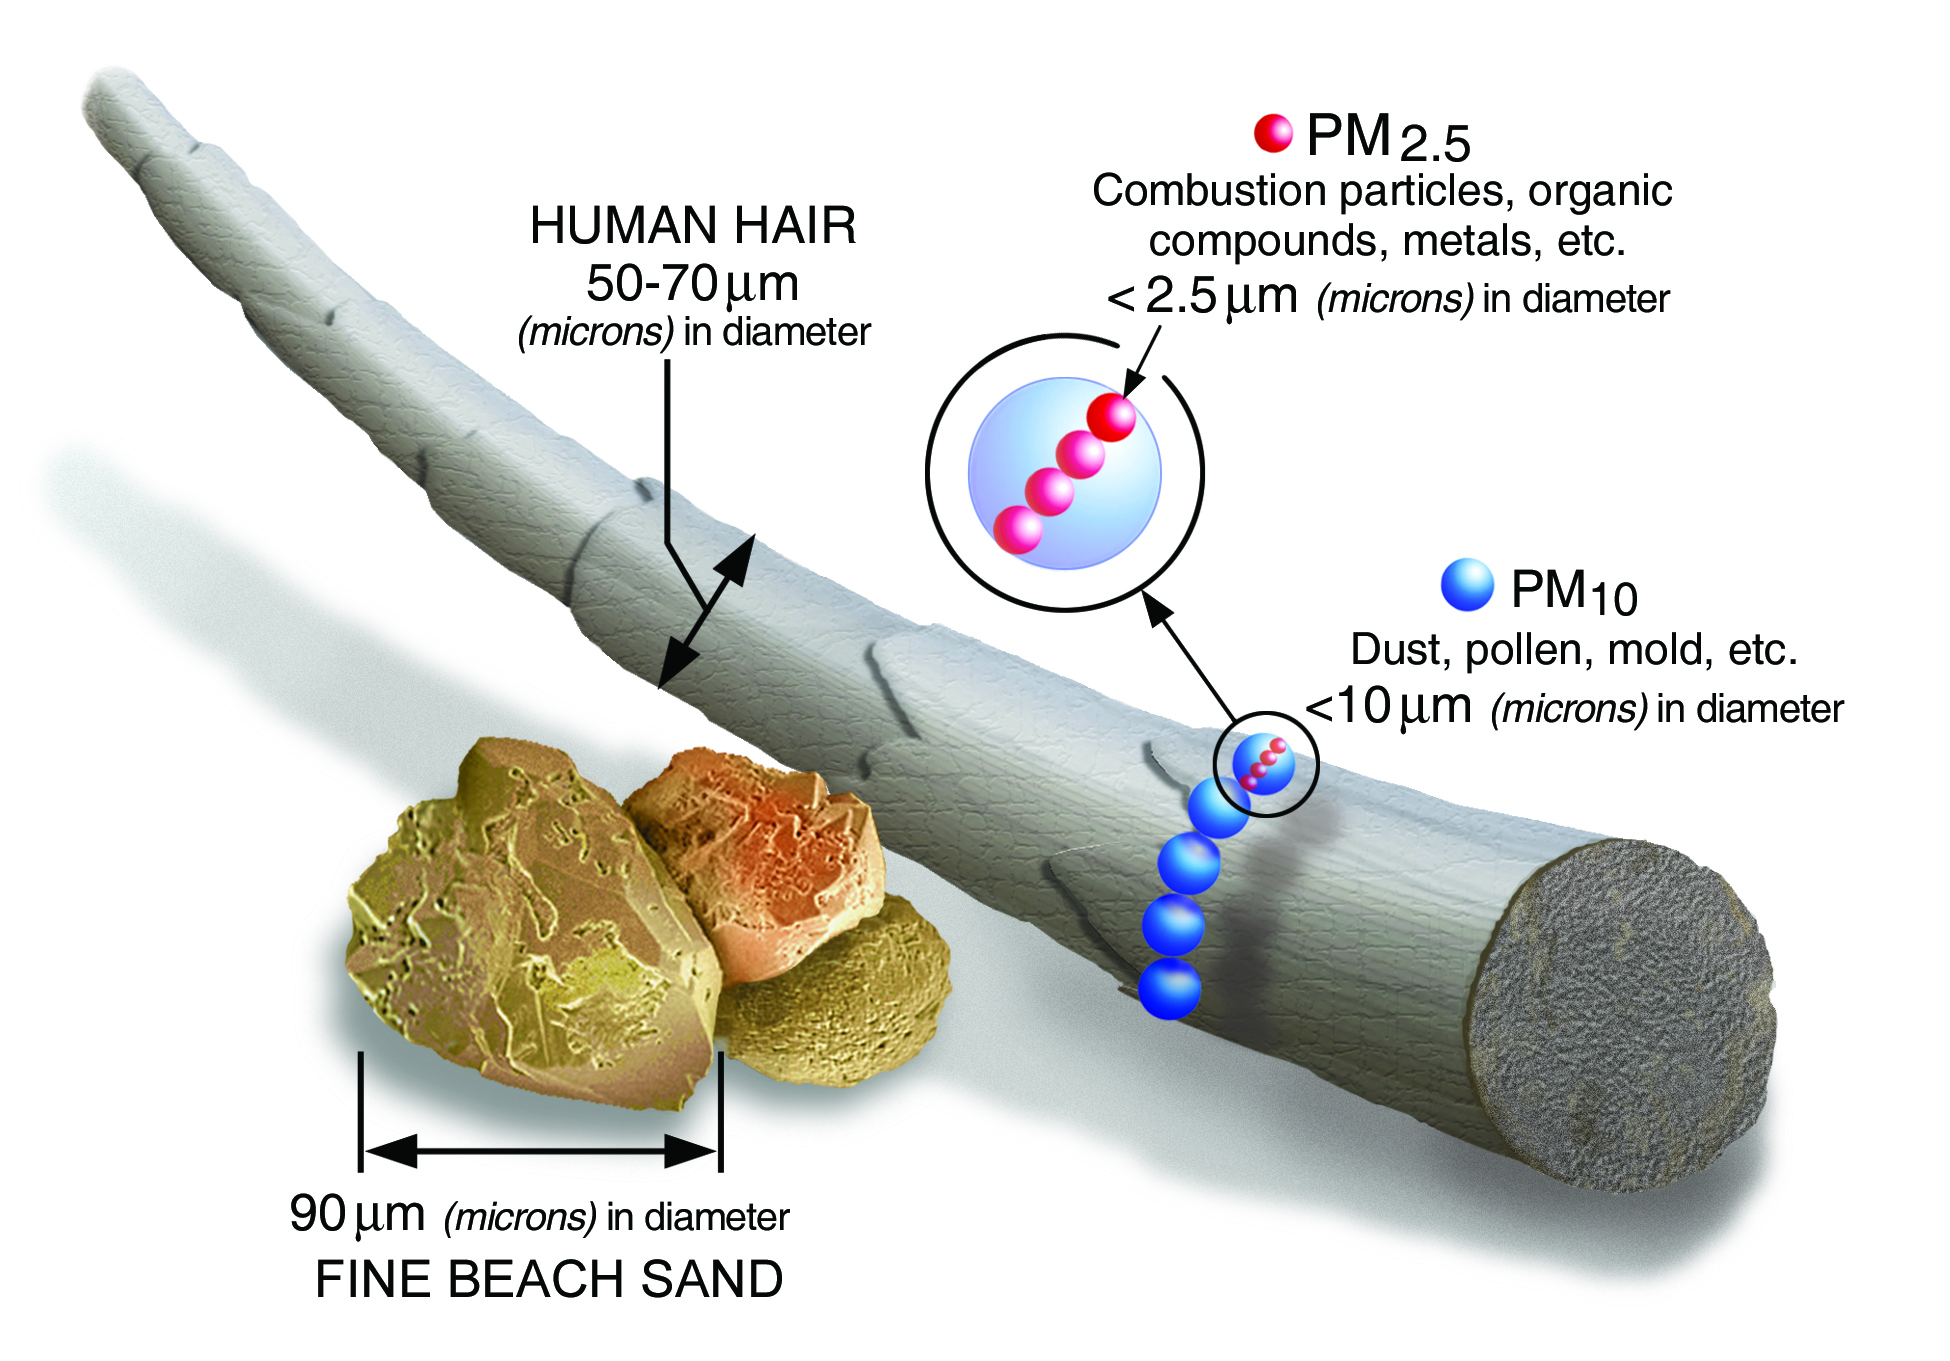 An image comparing size of particulate matter to other small objects. The largest object is a human hair (which is between 50-70 microns in diameter), then a grain of fine beach sand (which is about 90 microns in diameter). On the hair is shown an example of particulate matter that is less than 10 microns in diameter, such as dust, pollen, or mold. And on the the dust, pollen, or mold is shown an example of particulate matter that is less than 2.5 microns in diameter (combustion particles or VOCs).